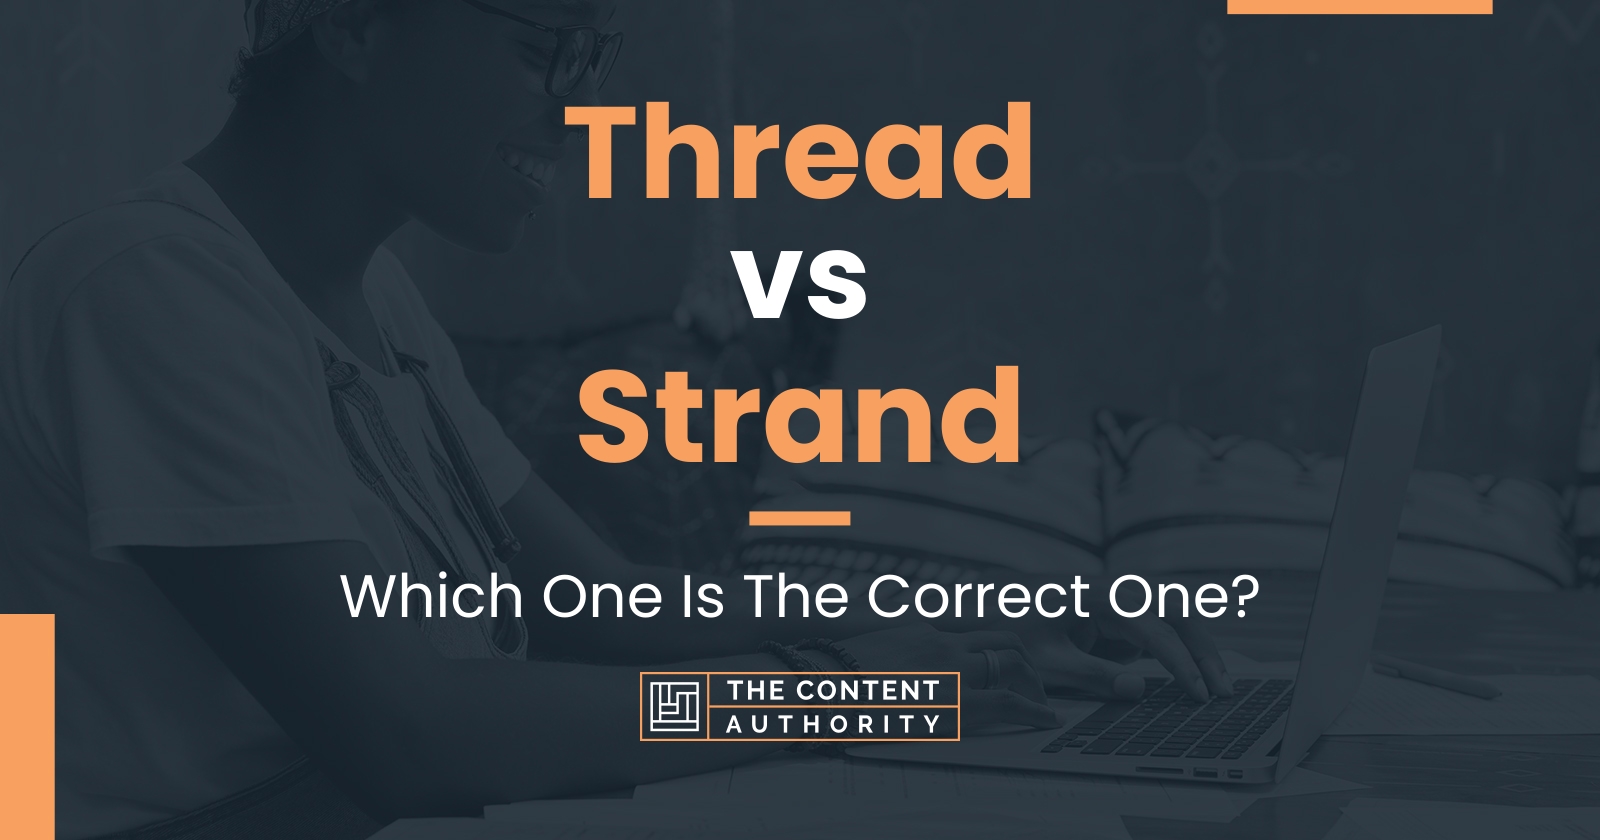 Thread vs Strand: Which One Is The Correct One?